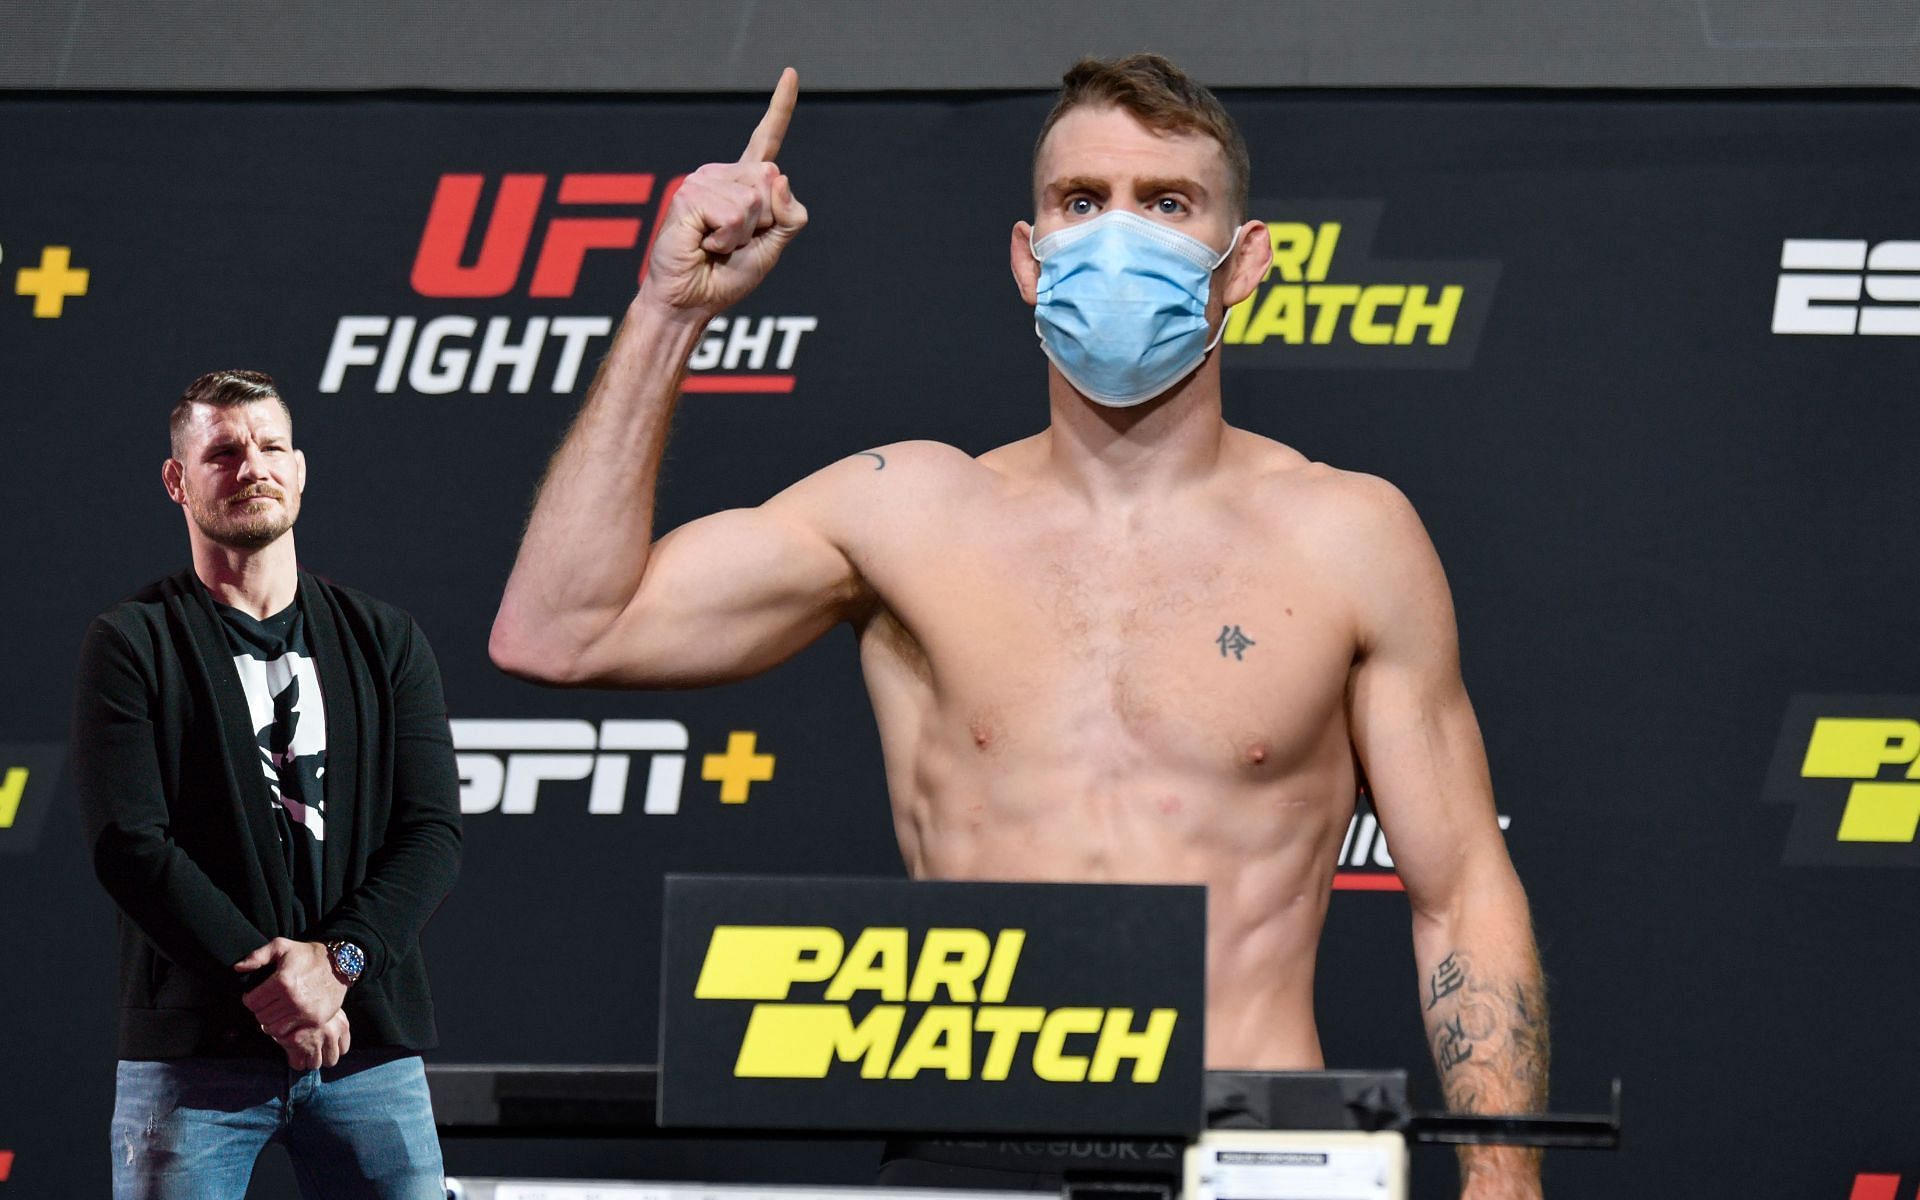 Michael Bisping (left) and Paul Felder (right) (Images via Getty)